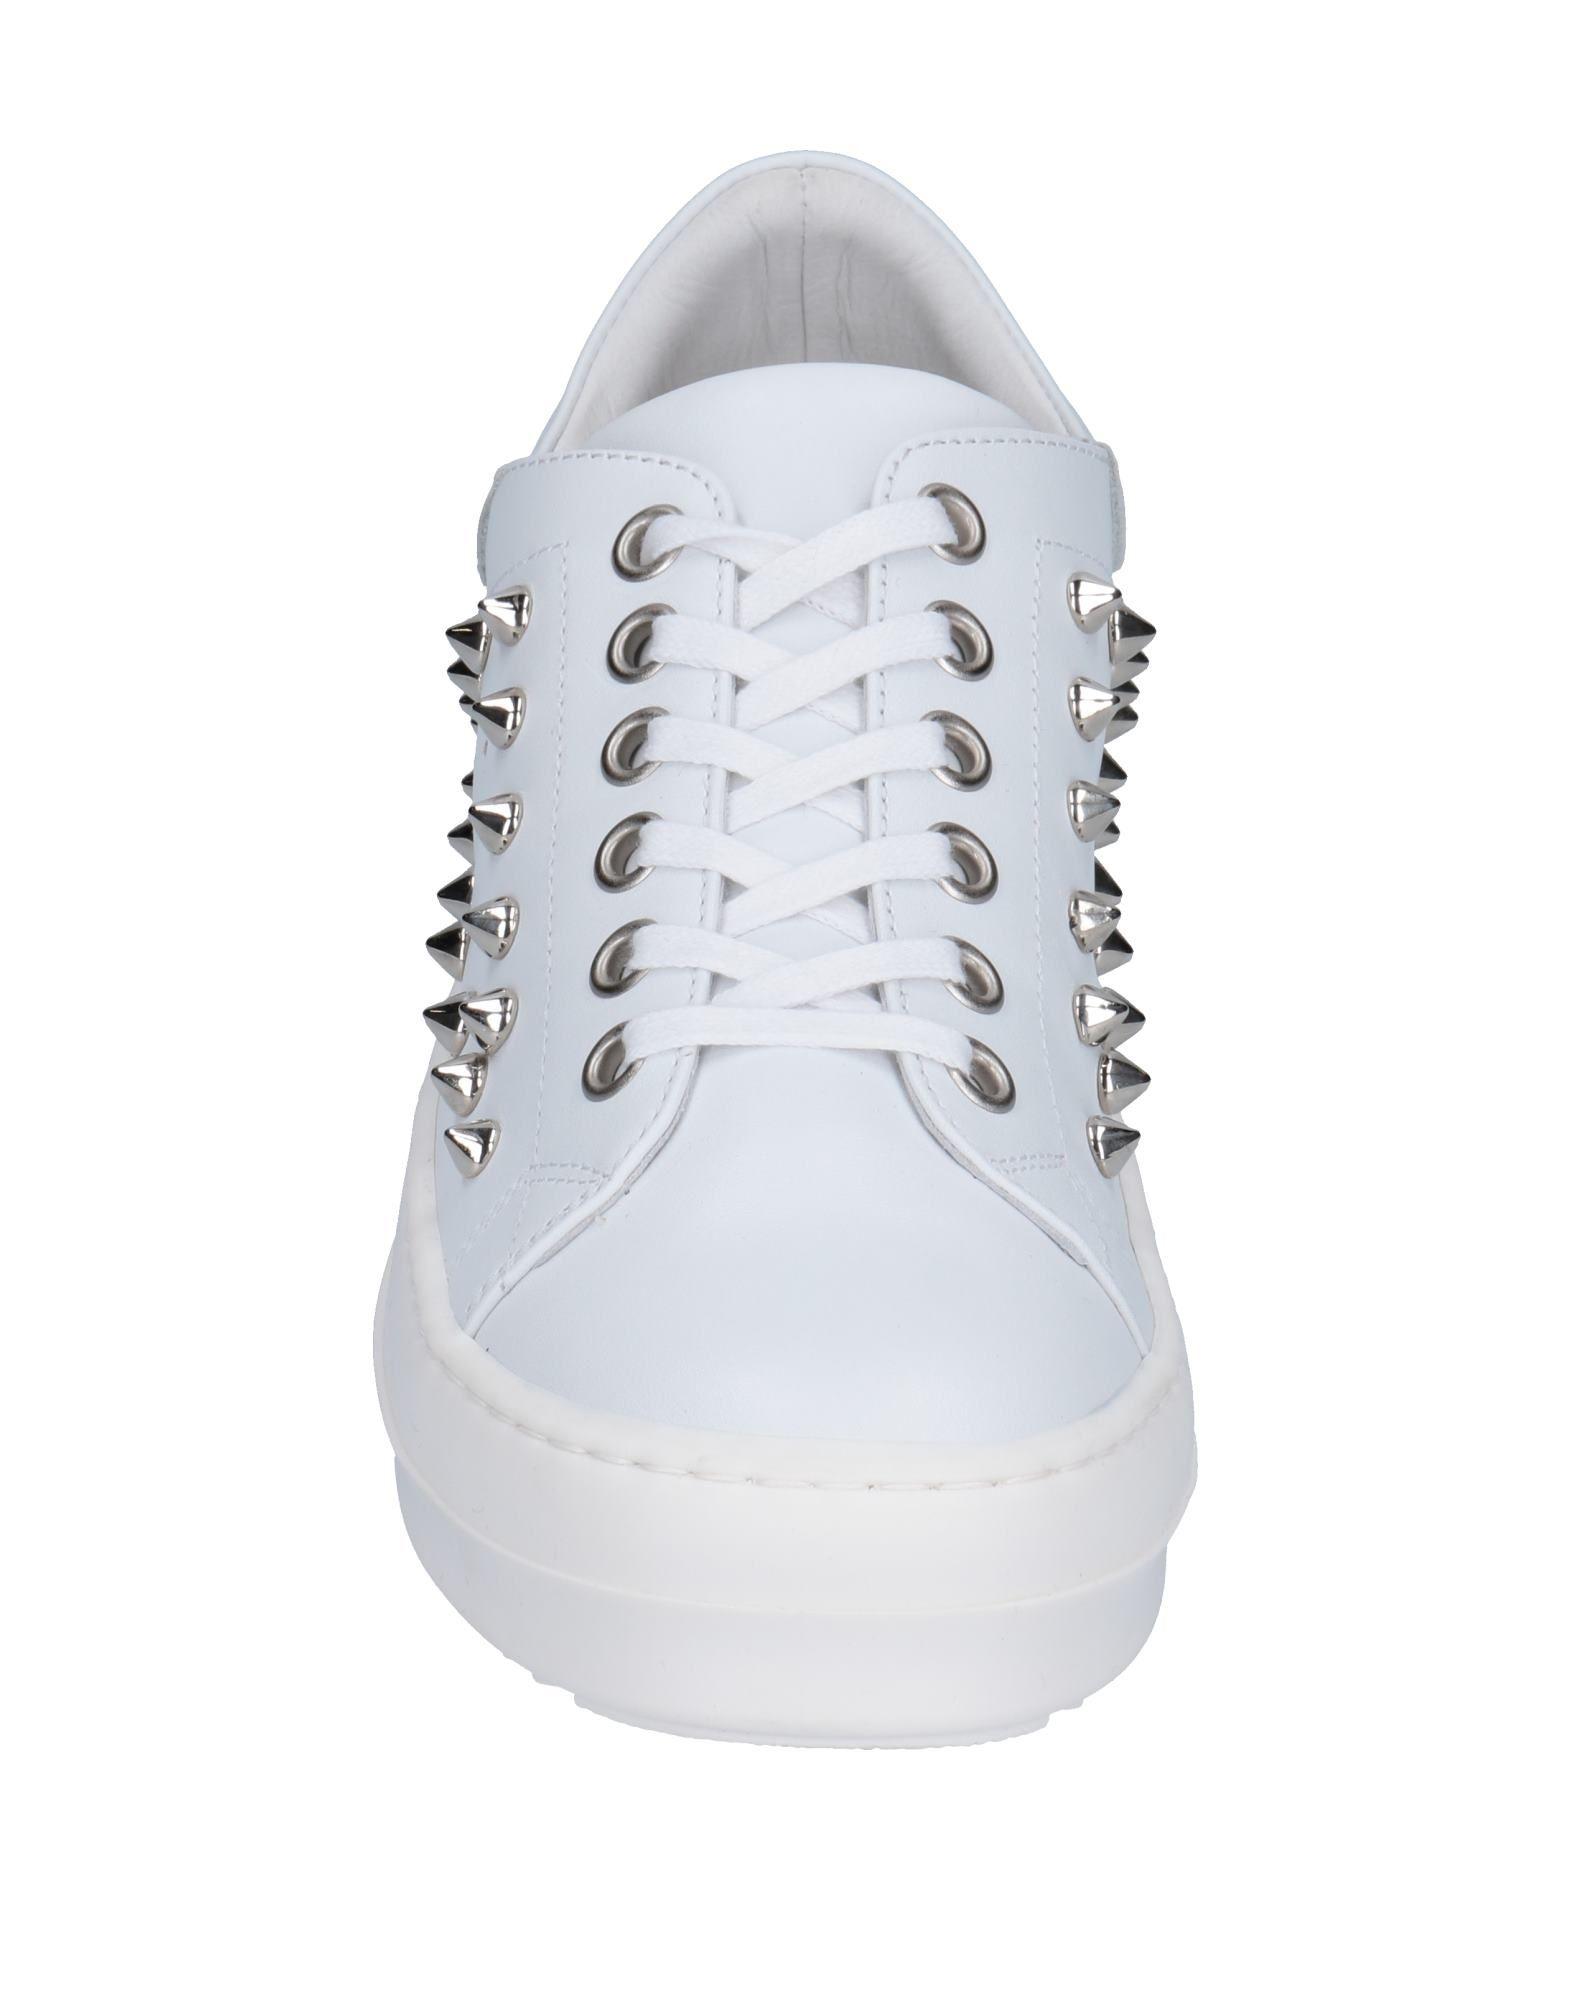 Les Hommes Leather Low-tops & Sneakers in White for Men - Lyst